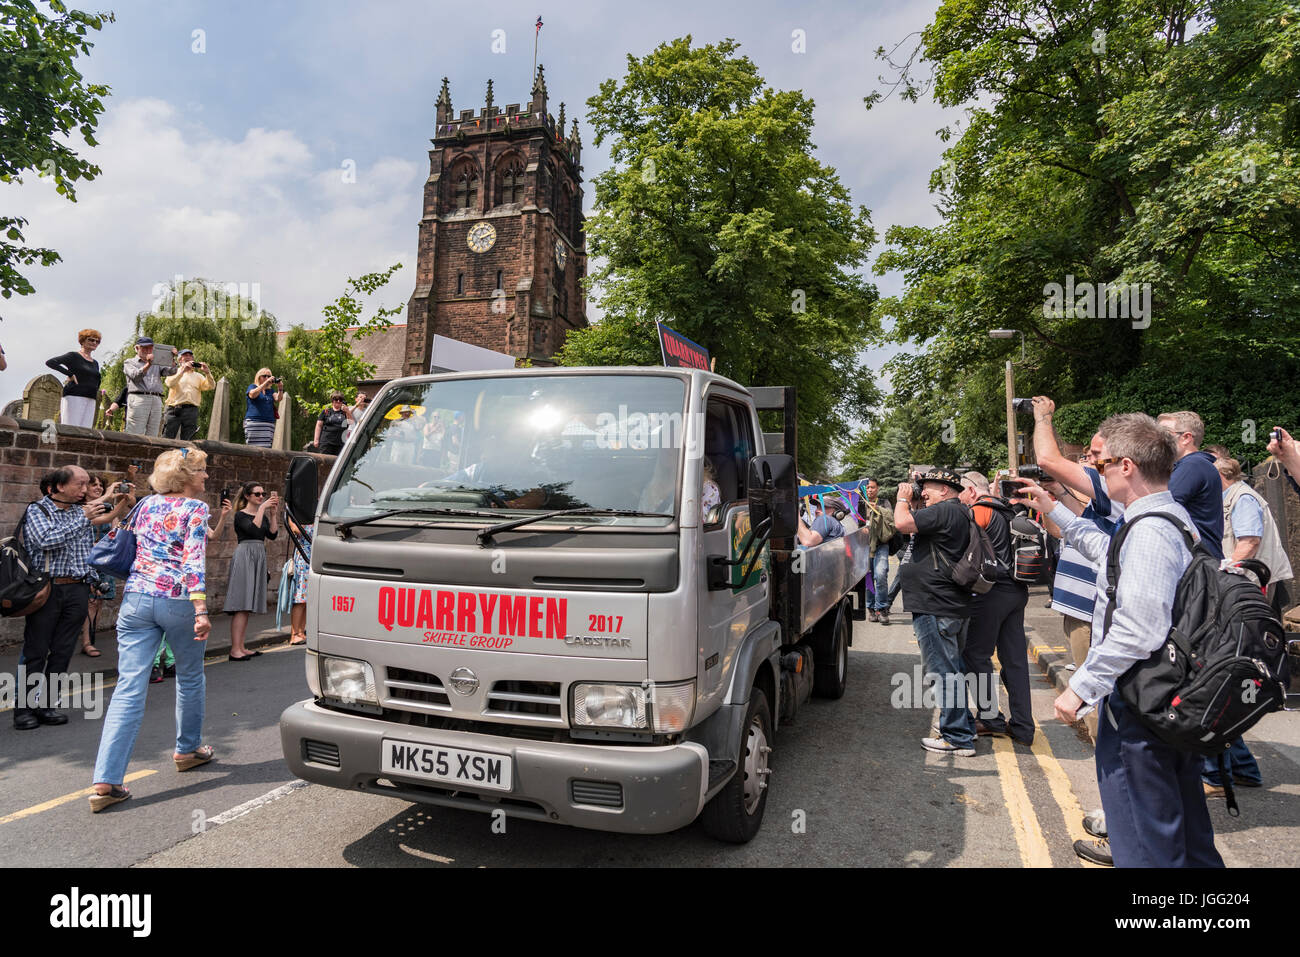 Woolton, Liverpool, UK. 6th July 2017. A parade was held in Woolton Liverpool today to mark the day 60 years ago at the St. Peter's church fete that brought John Lennon and Paul McCartney together to form the Beatles. John Lennon's original band The Quarrymen took a ride round the village on a local lorry and today surviving members of the group recreated the drive with original lorry driver Dougie Chadwick at the wheel. Credit: John Davidson/Alamy Live News Stock Photo